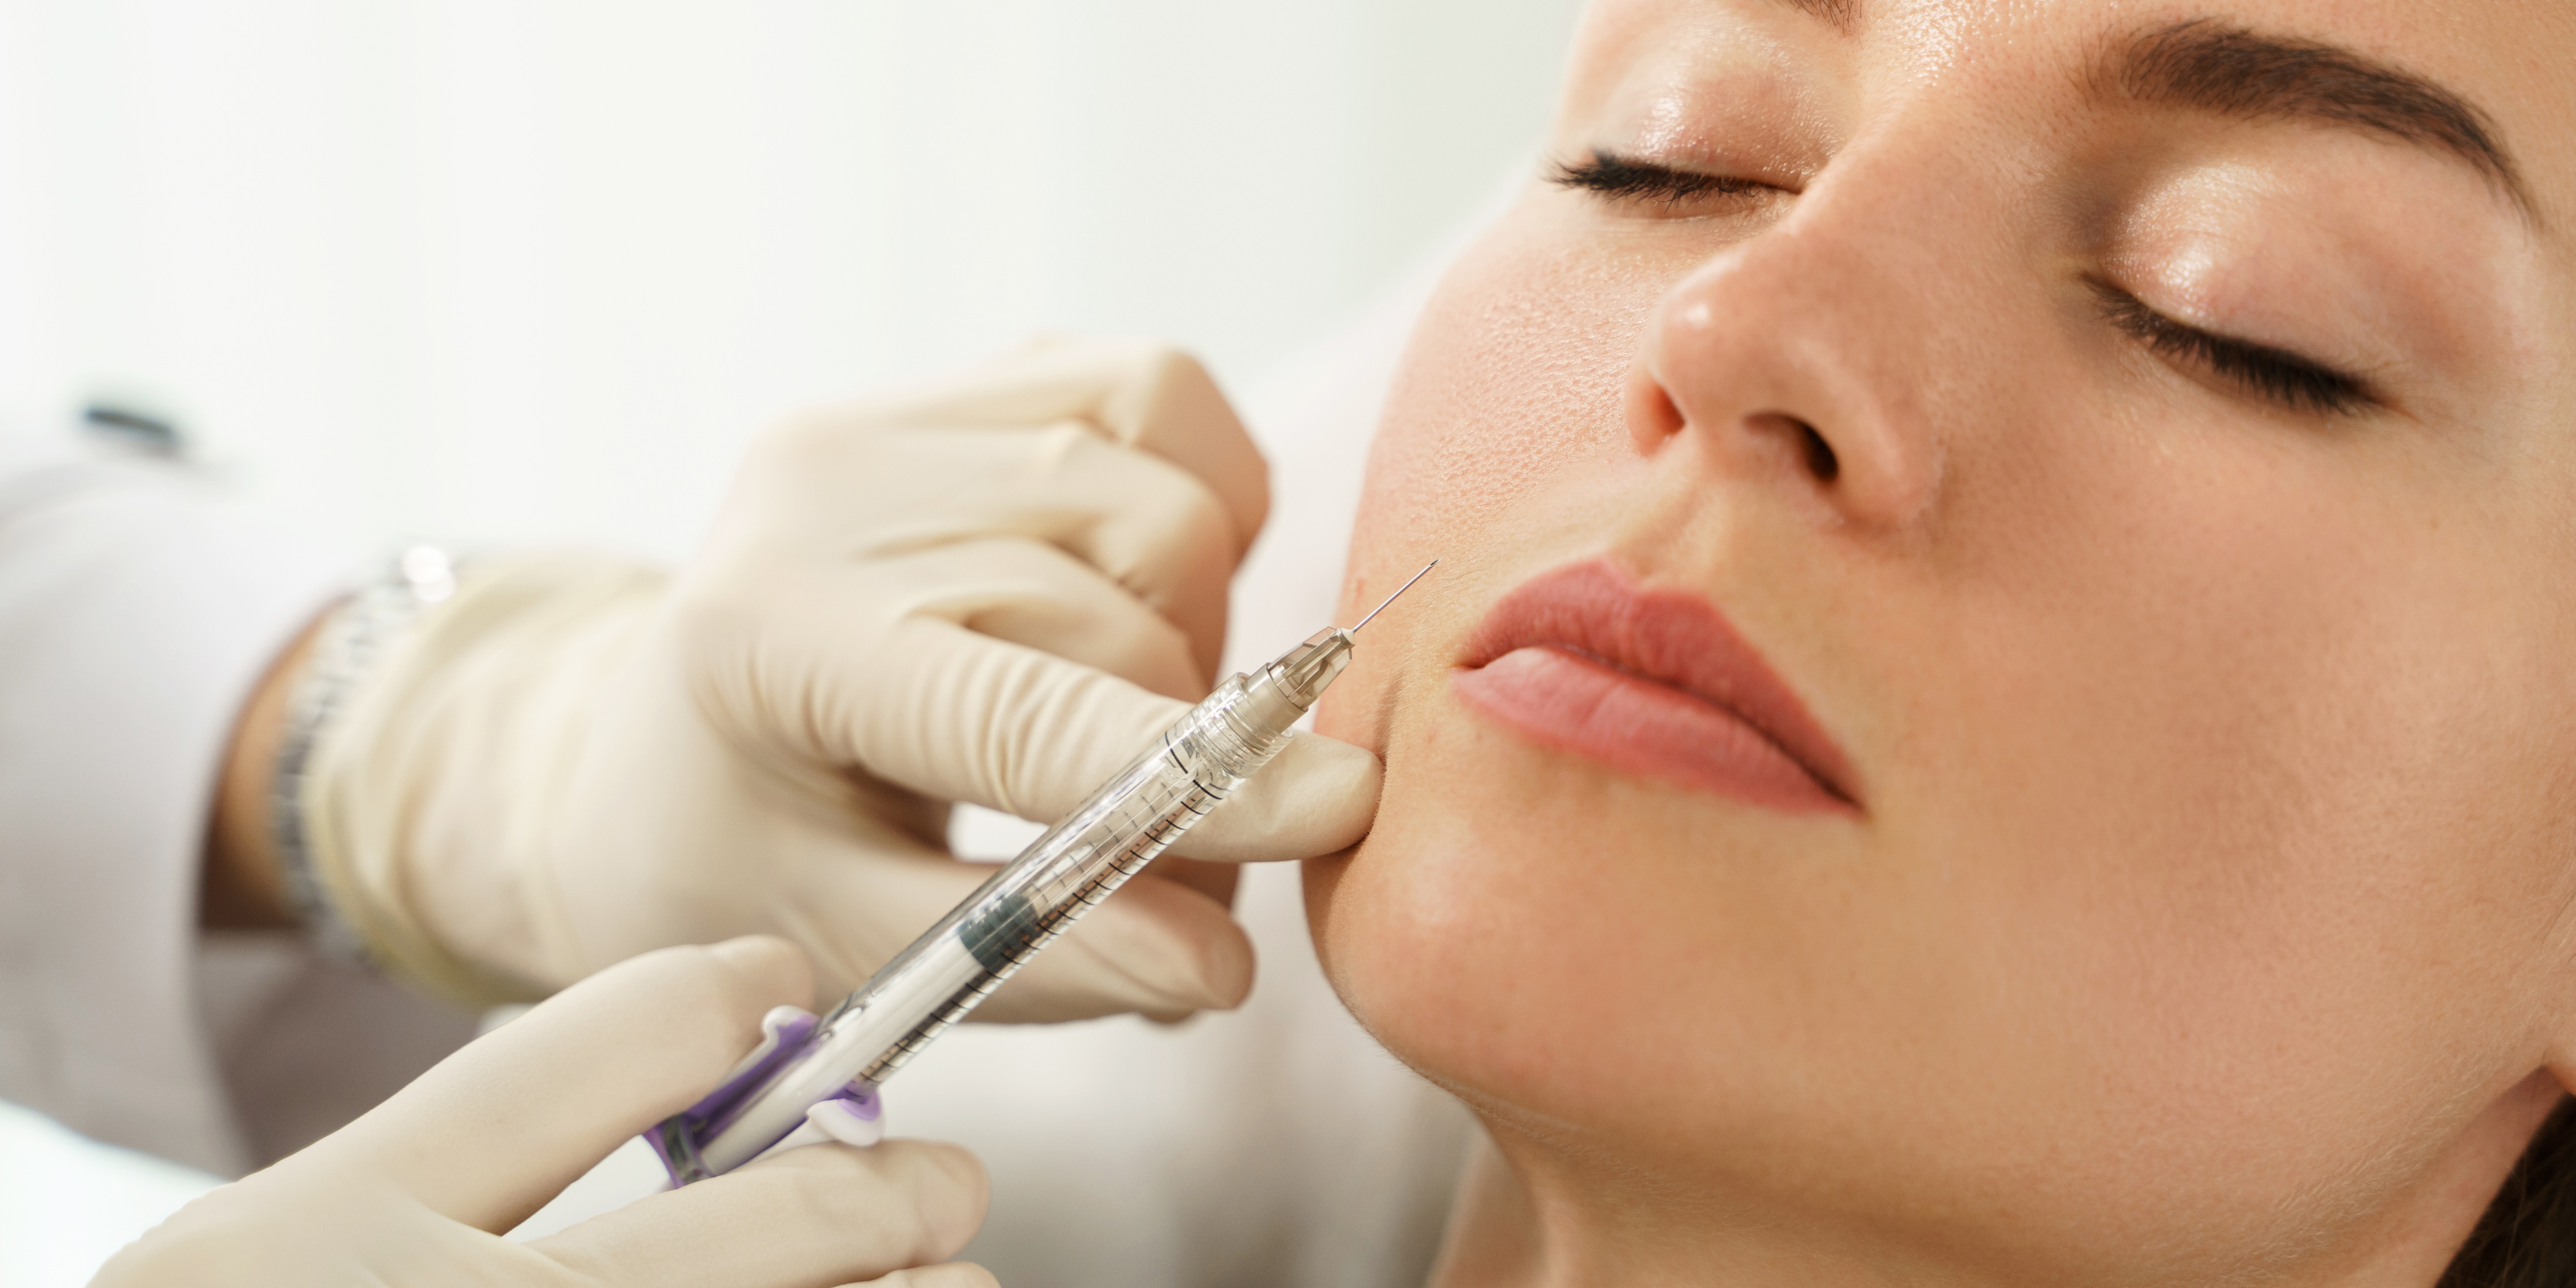 Aesthetic Nurse injecting dermal filler into a woman's face.